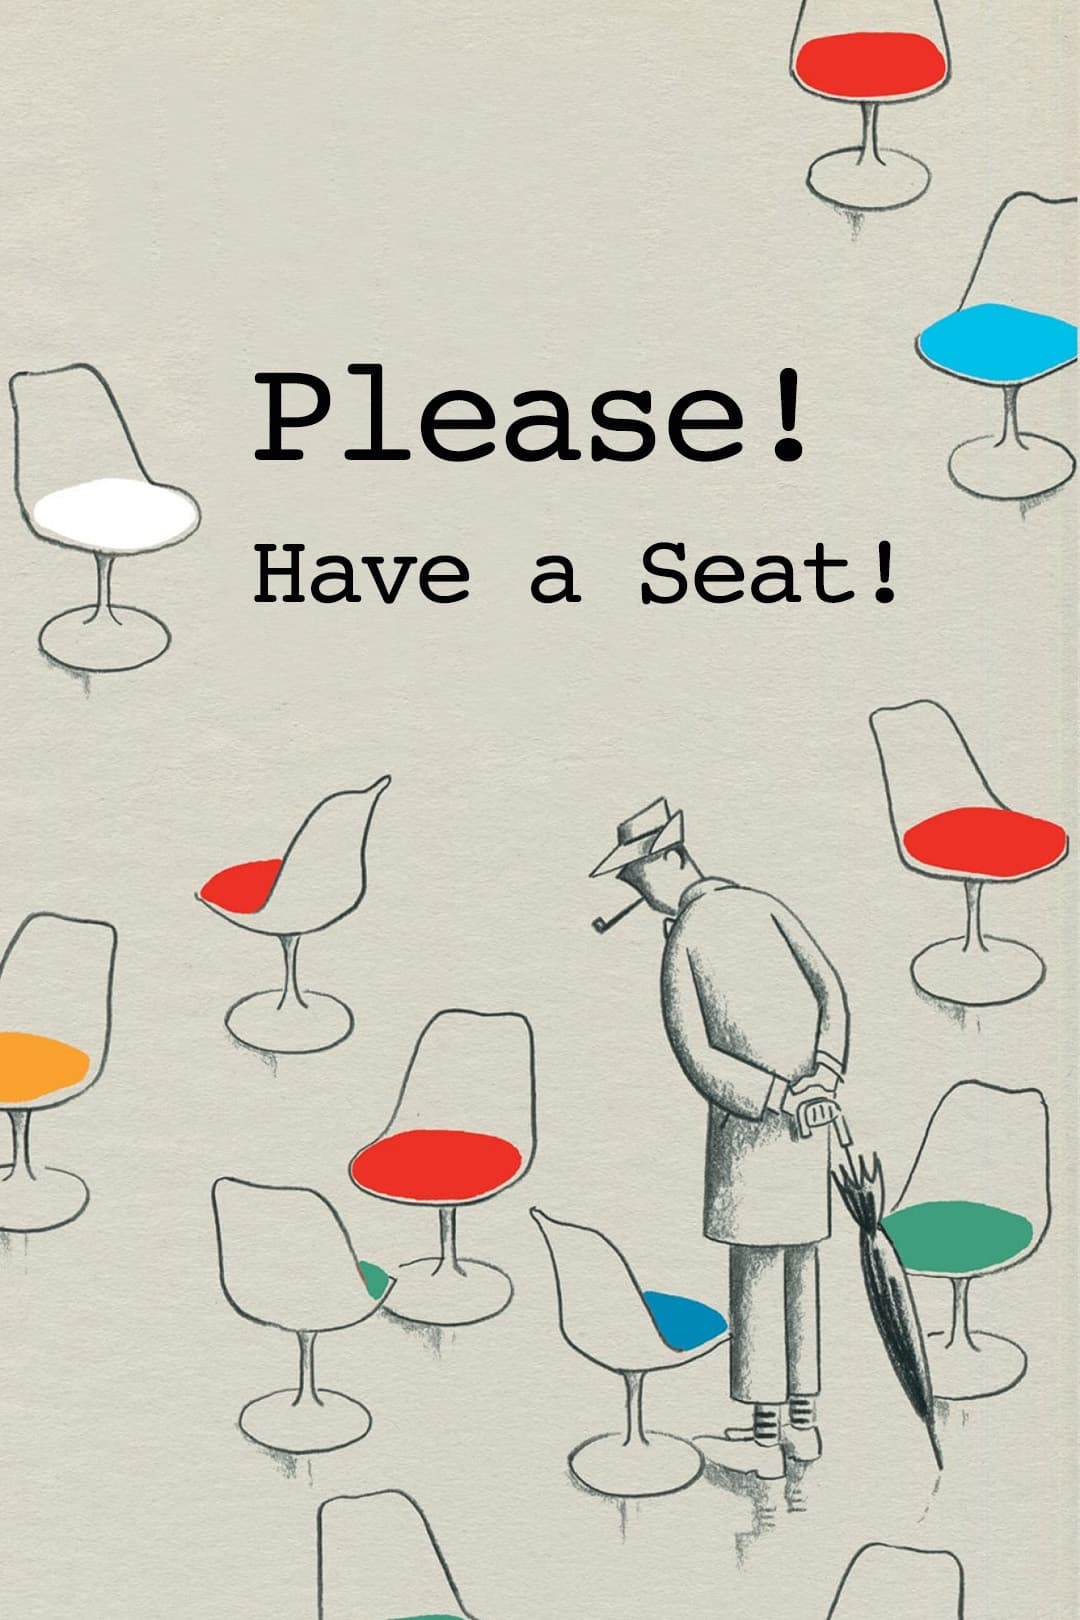 Please! Have a Seat!